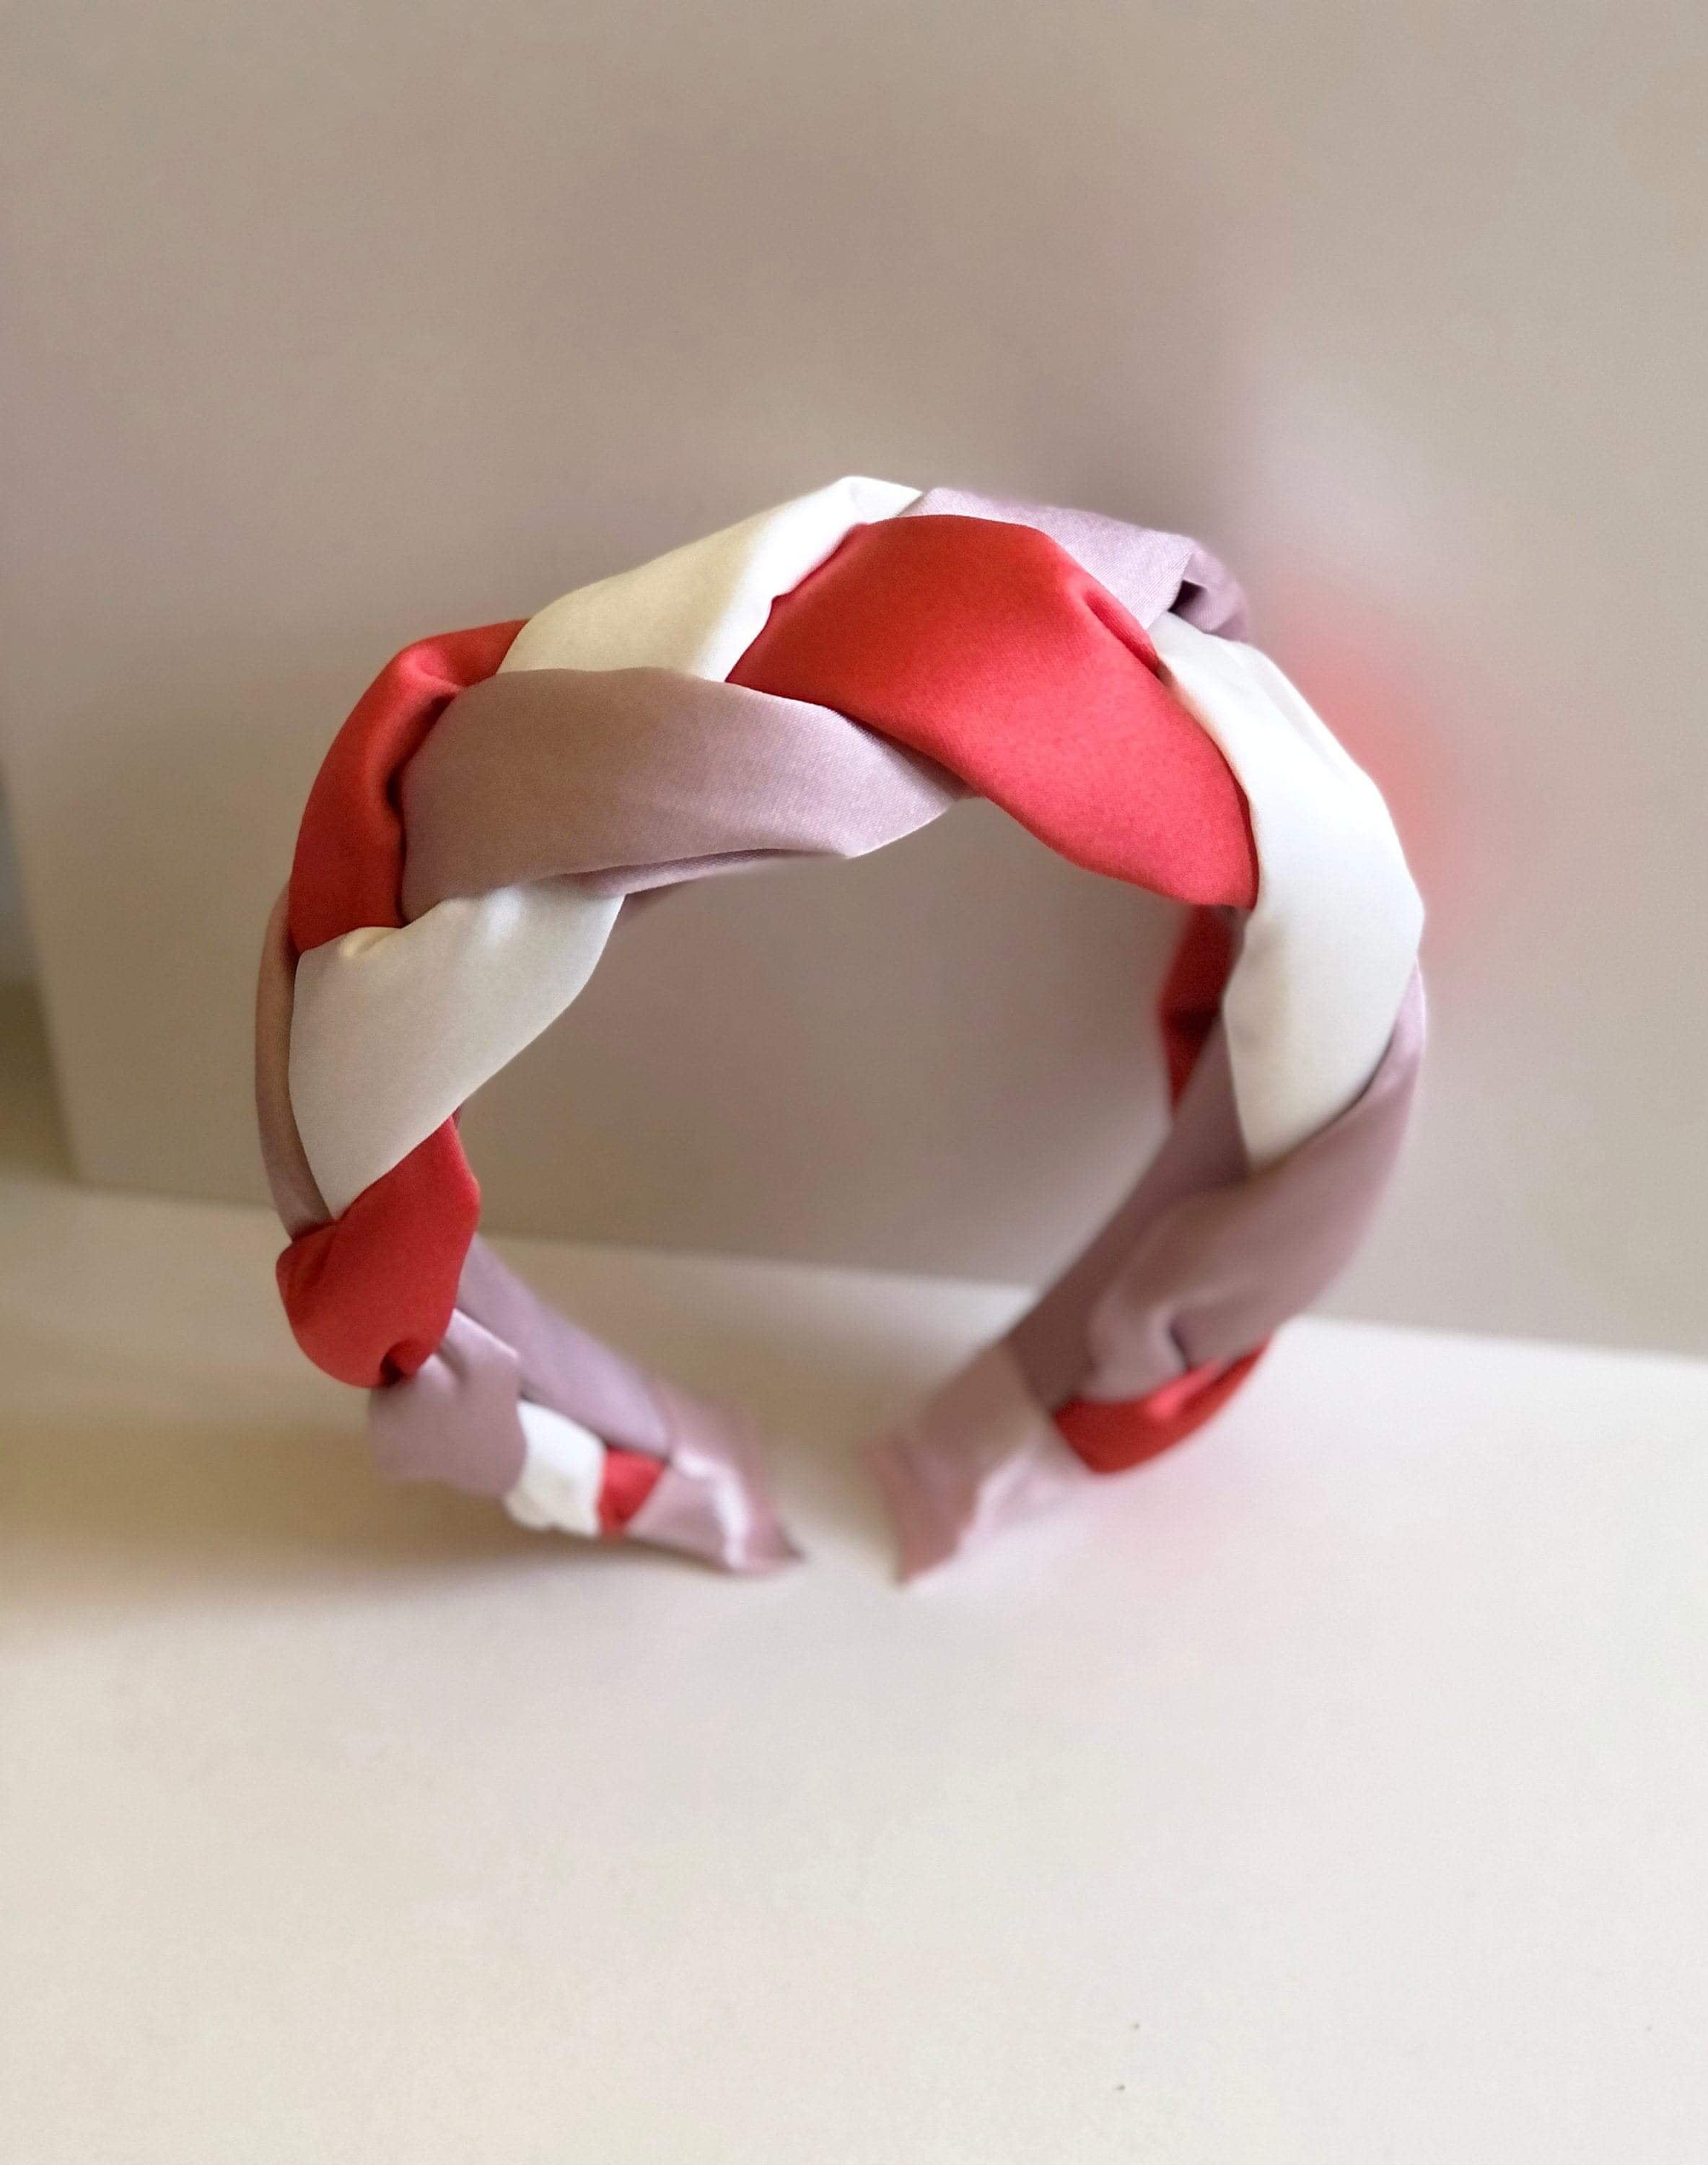 Elevate your look with this stylish padded satin headband, crafted in a unique lilac, white, and light red color, and featuring a twisted design for added flair.